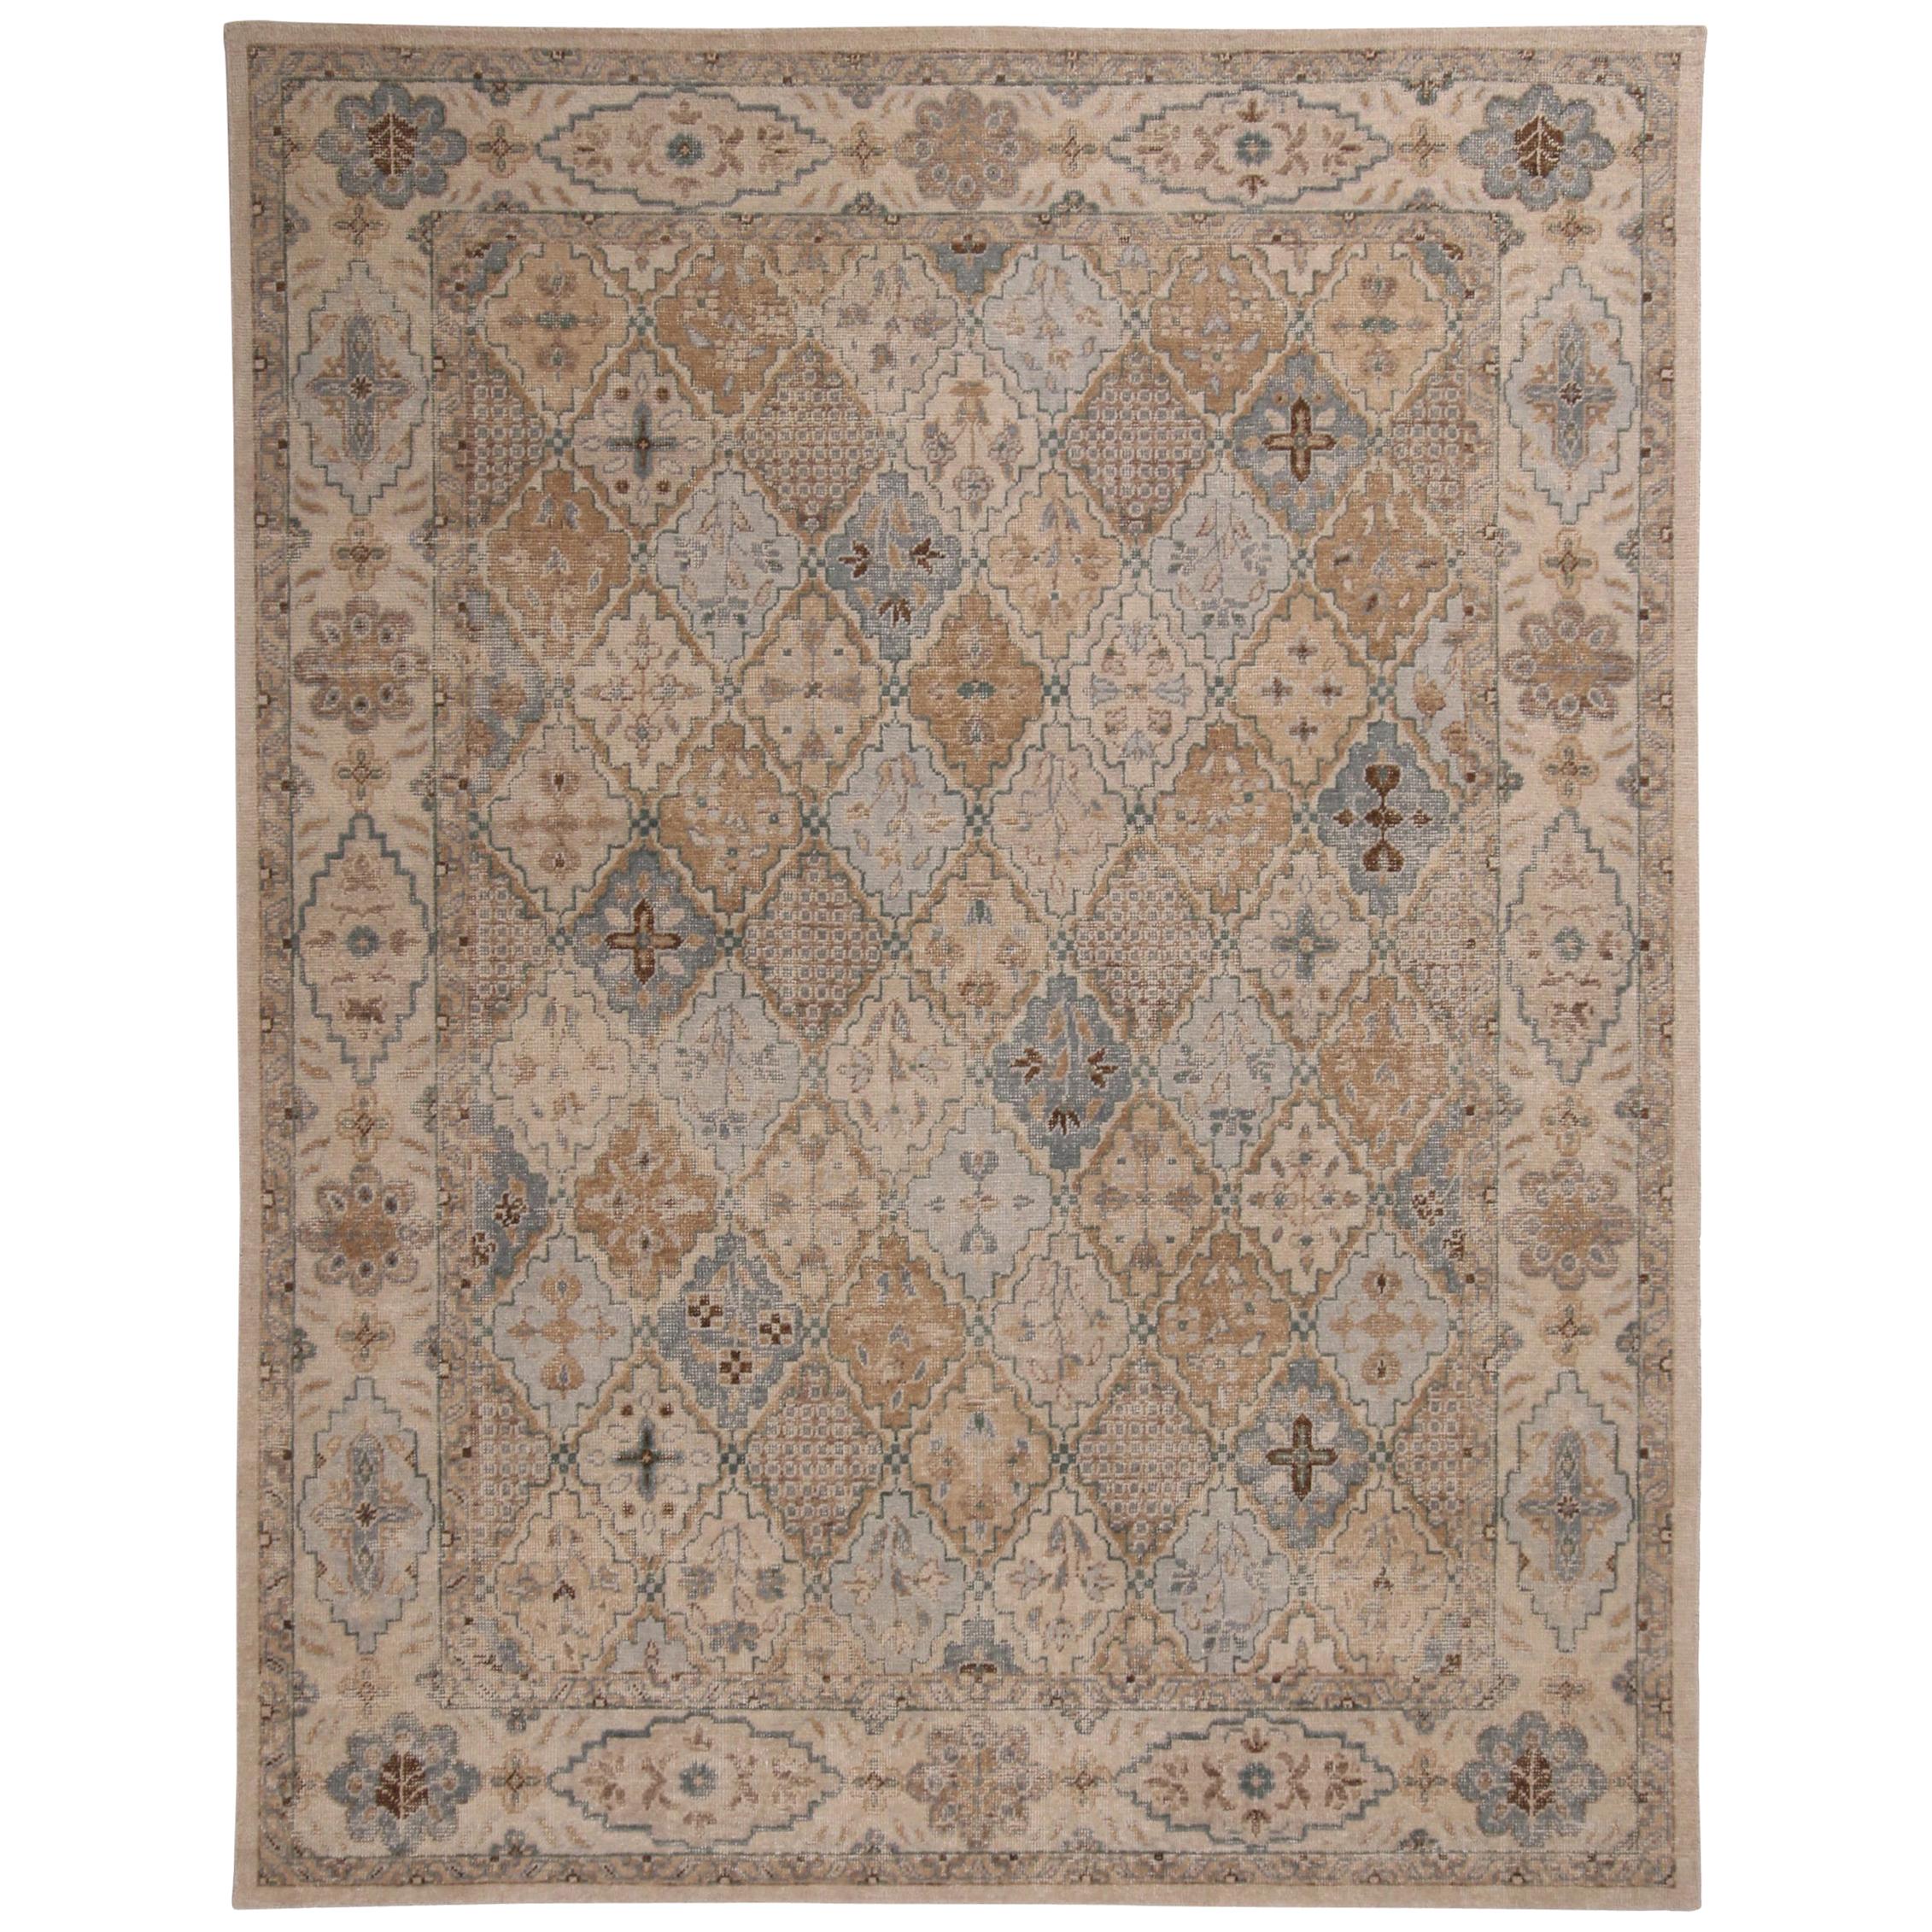 Tabriz Inspired White Blue and Gold Wool Rug from the Rug & Kilim's Homage